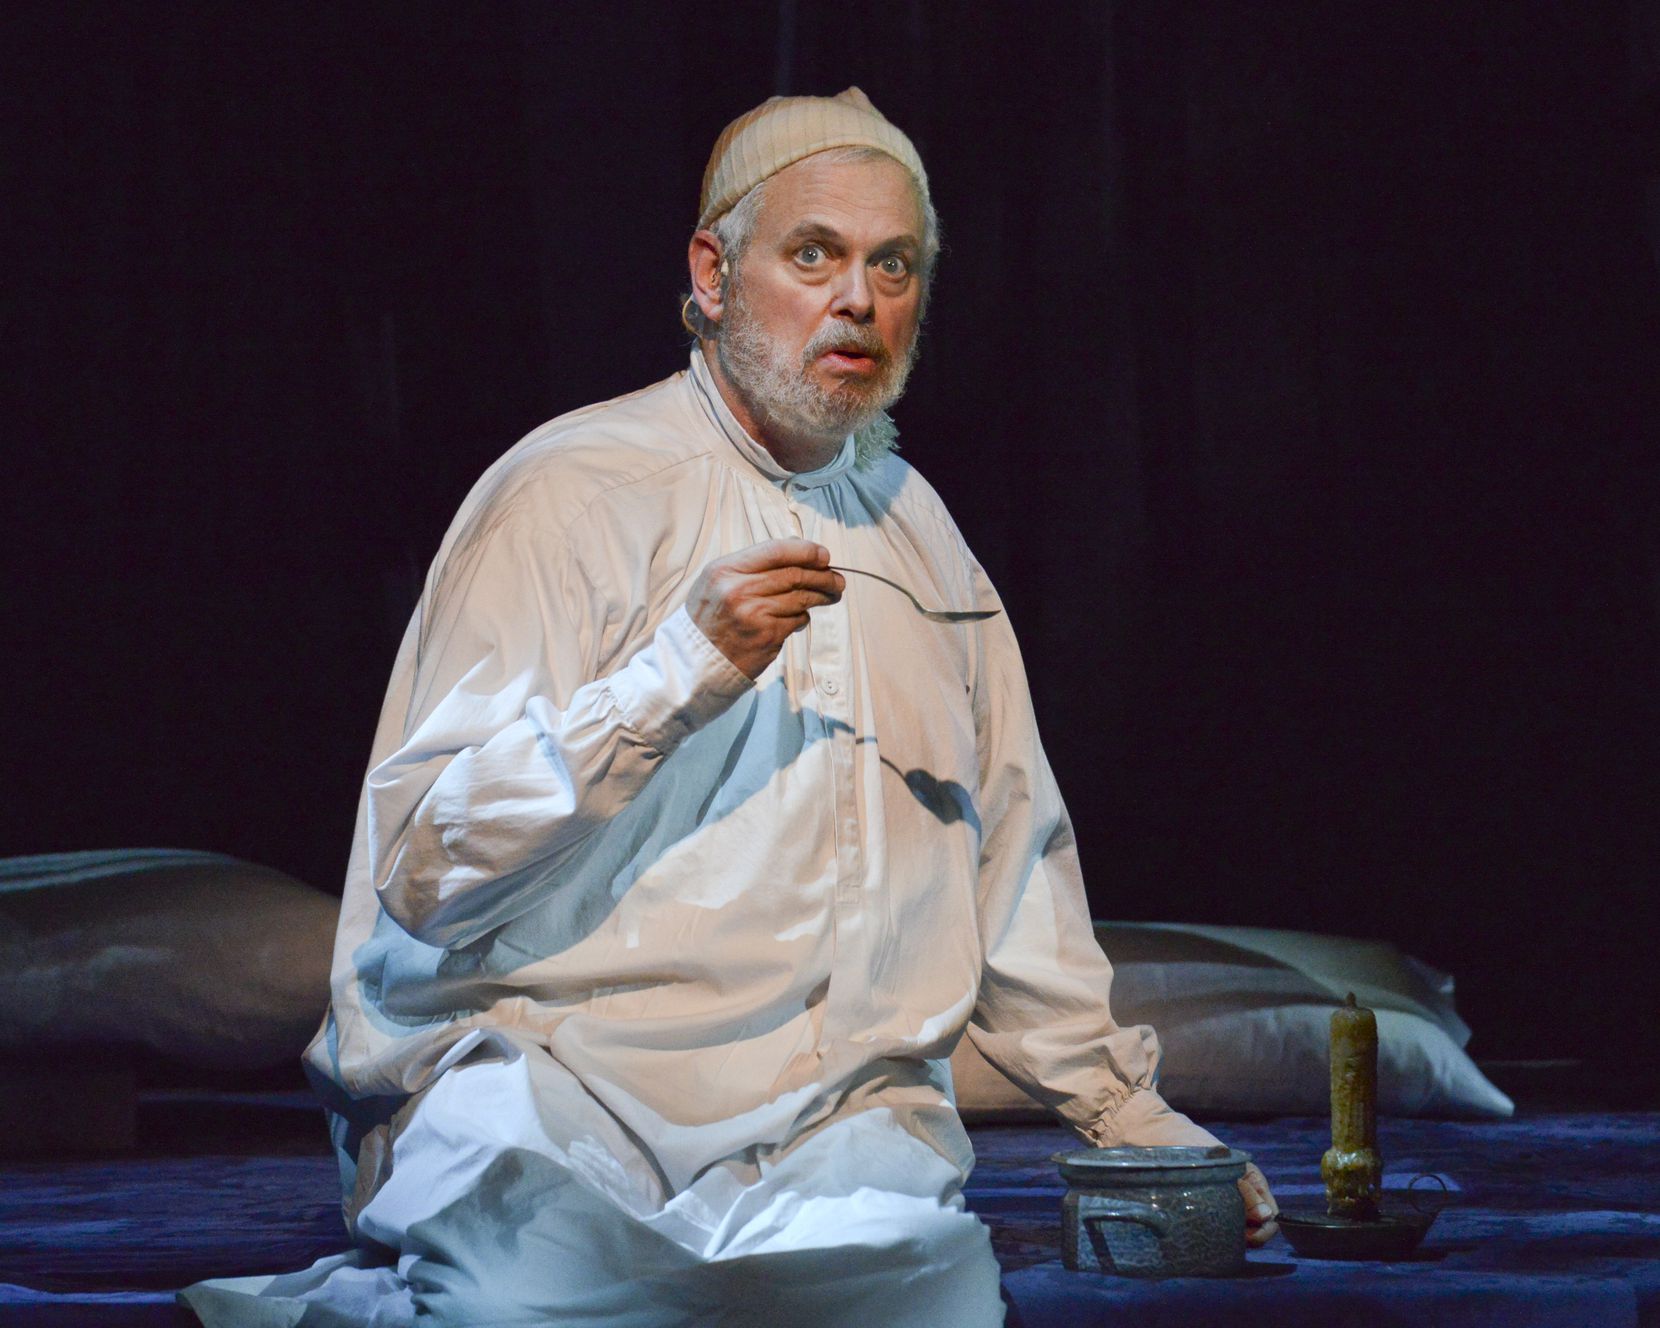 Kieran Connolly starred as Scrooge in Dallas Theater Center's 2013 production of "A...